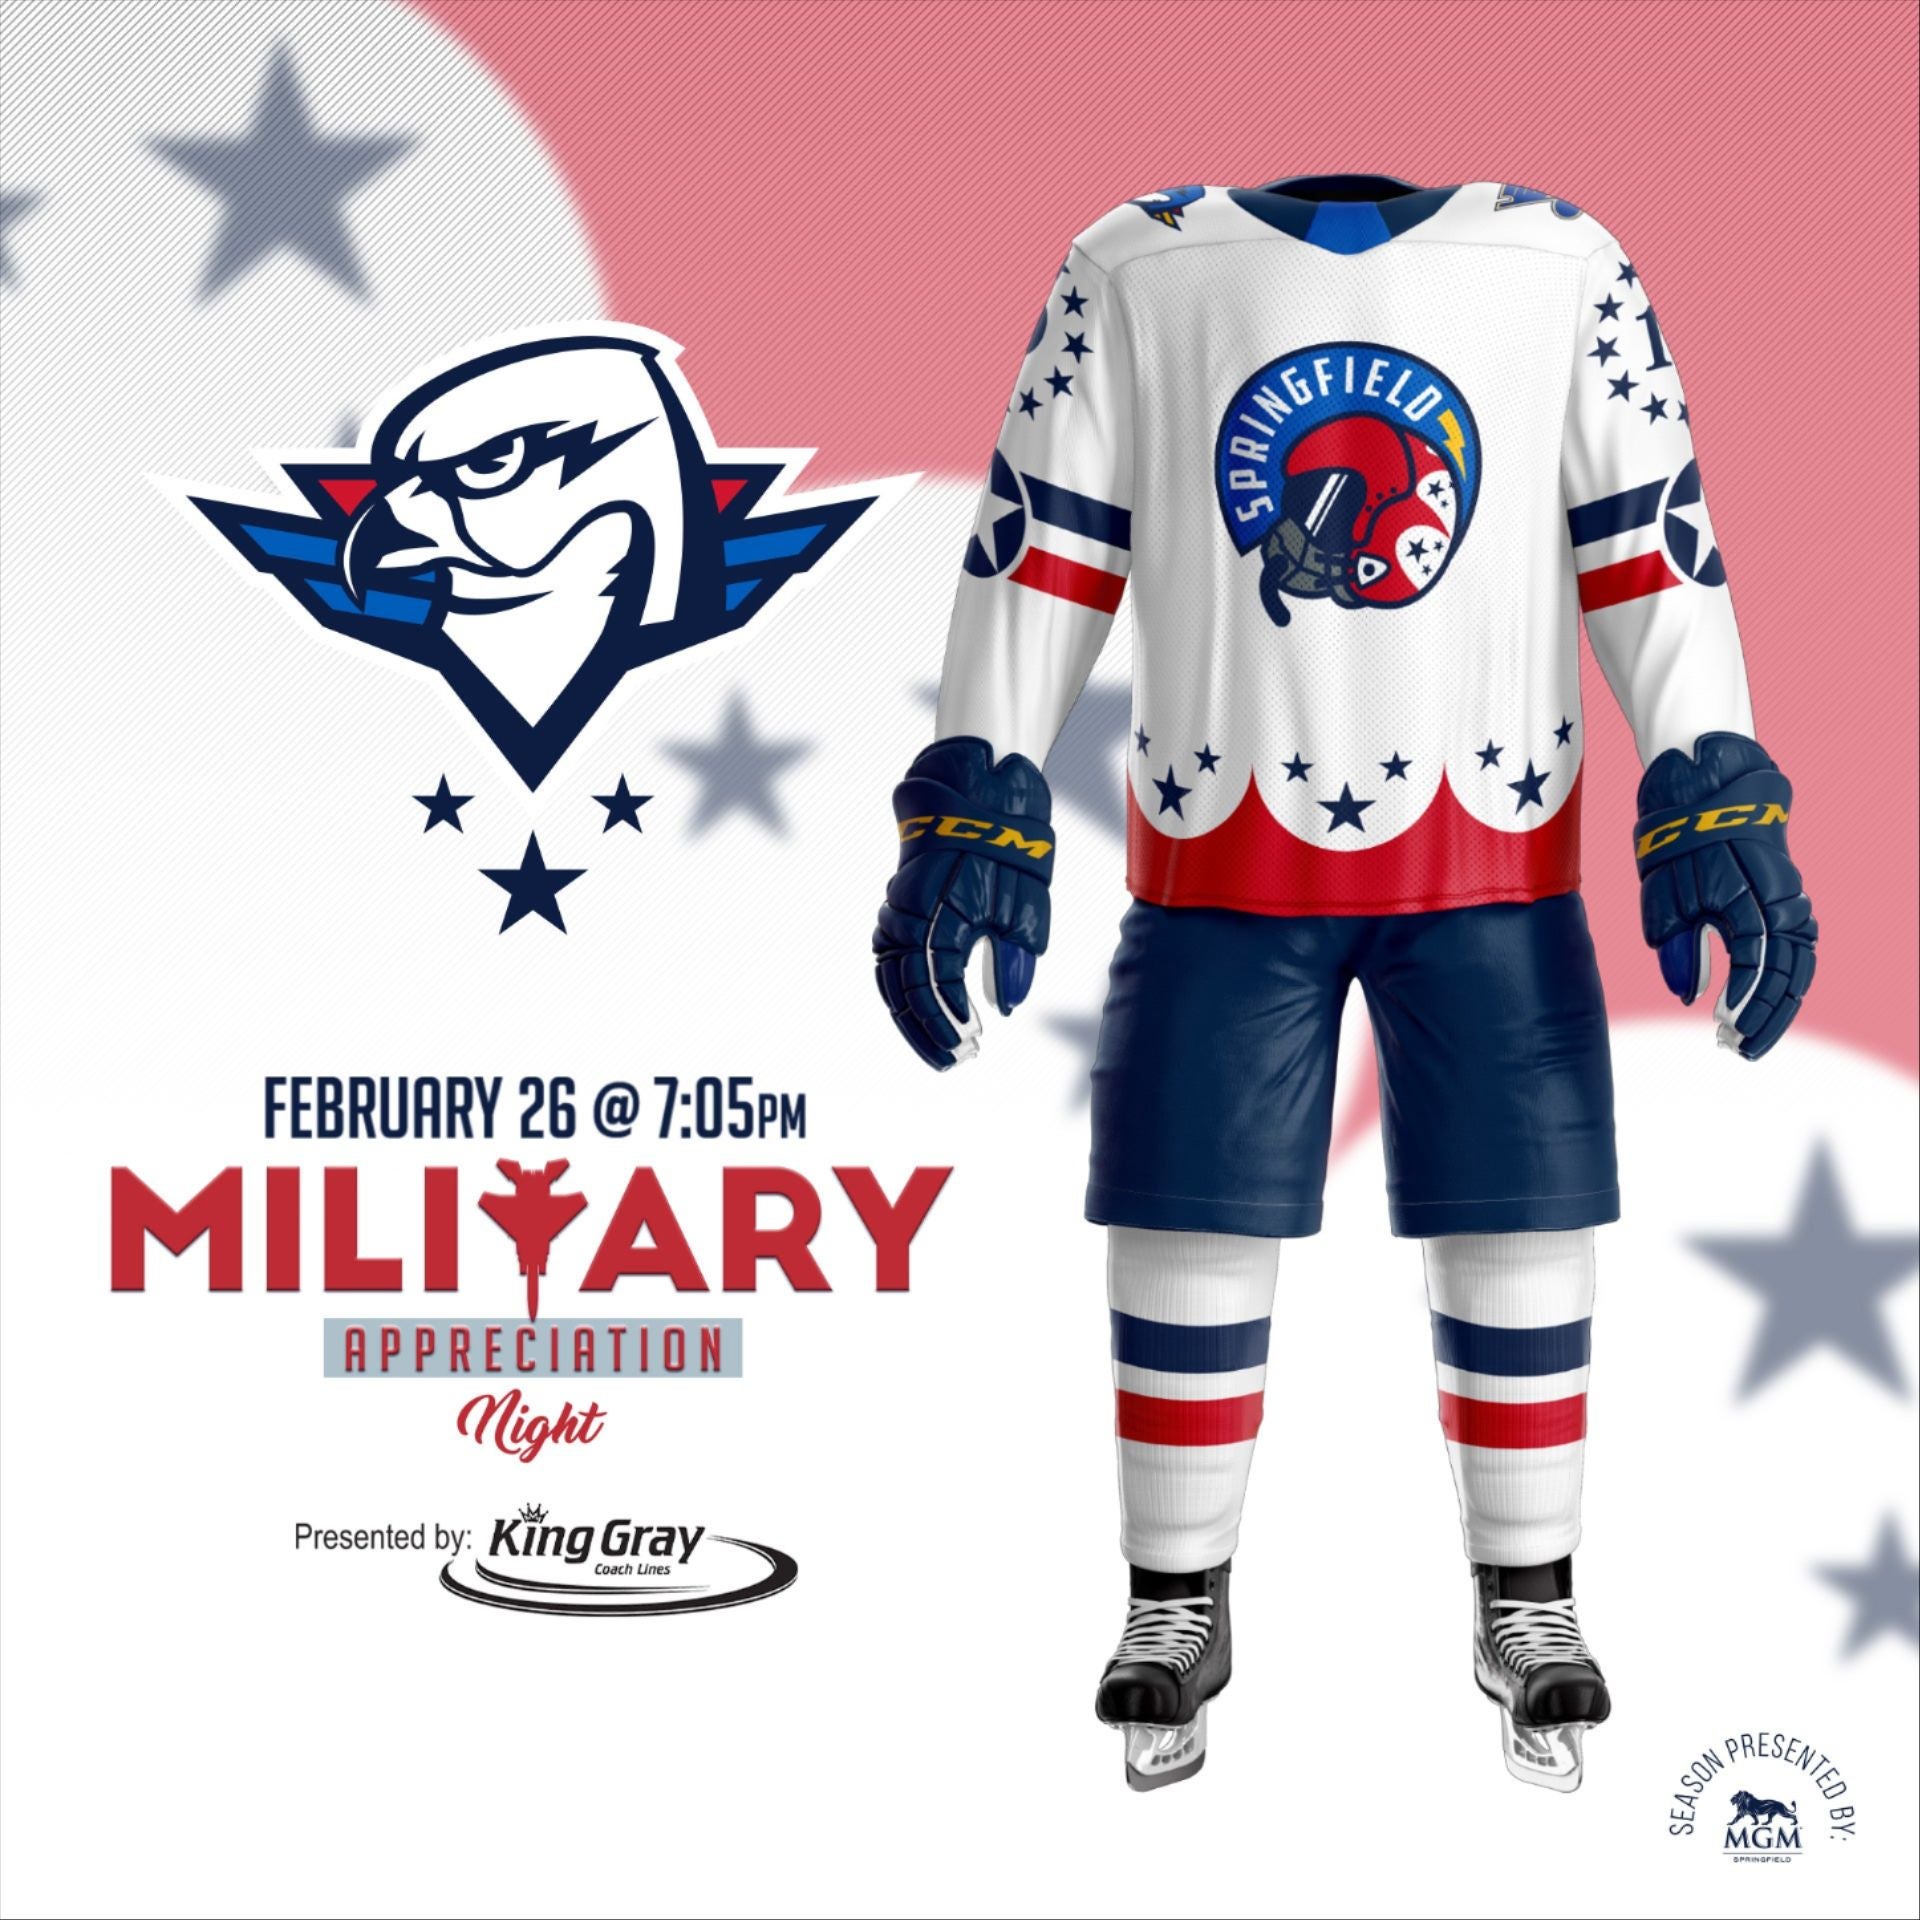 $99 Jerseys - This week only! - Springfield Thunderbirds